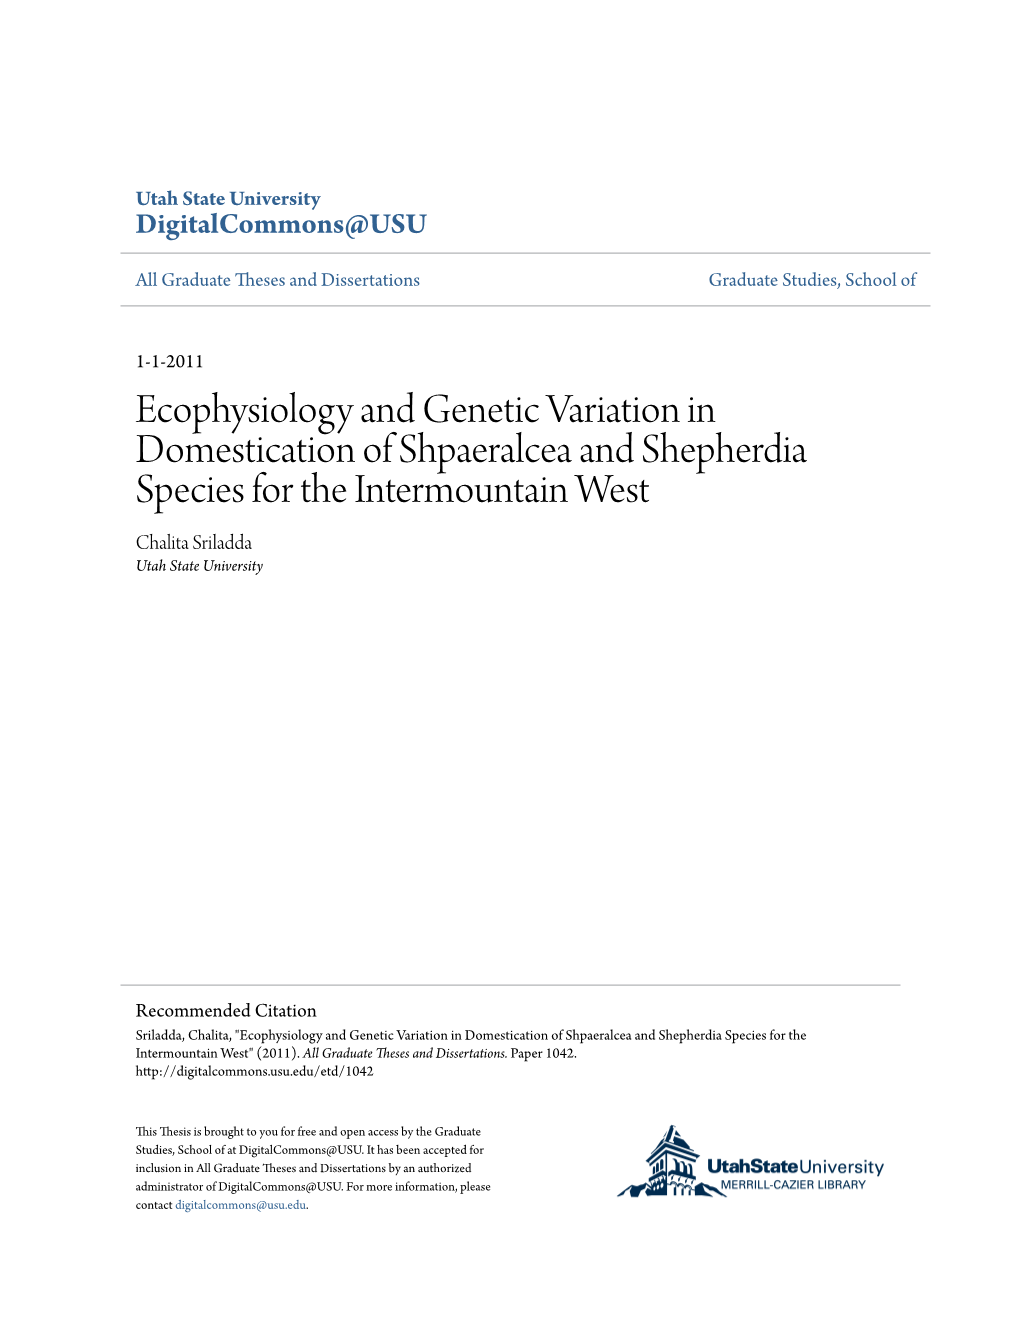 Ecophysiology and Genetic Variation in Domestication of Sphaeralcea and Shepherdia Species for the Intermountain West